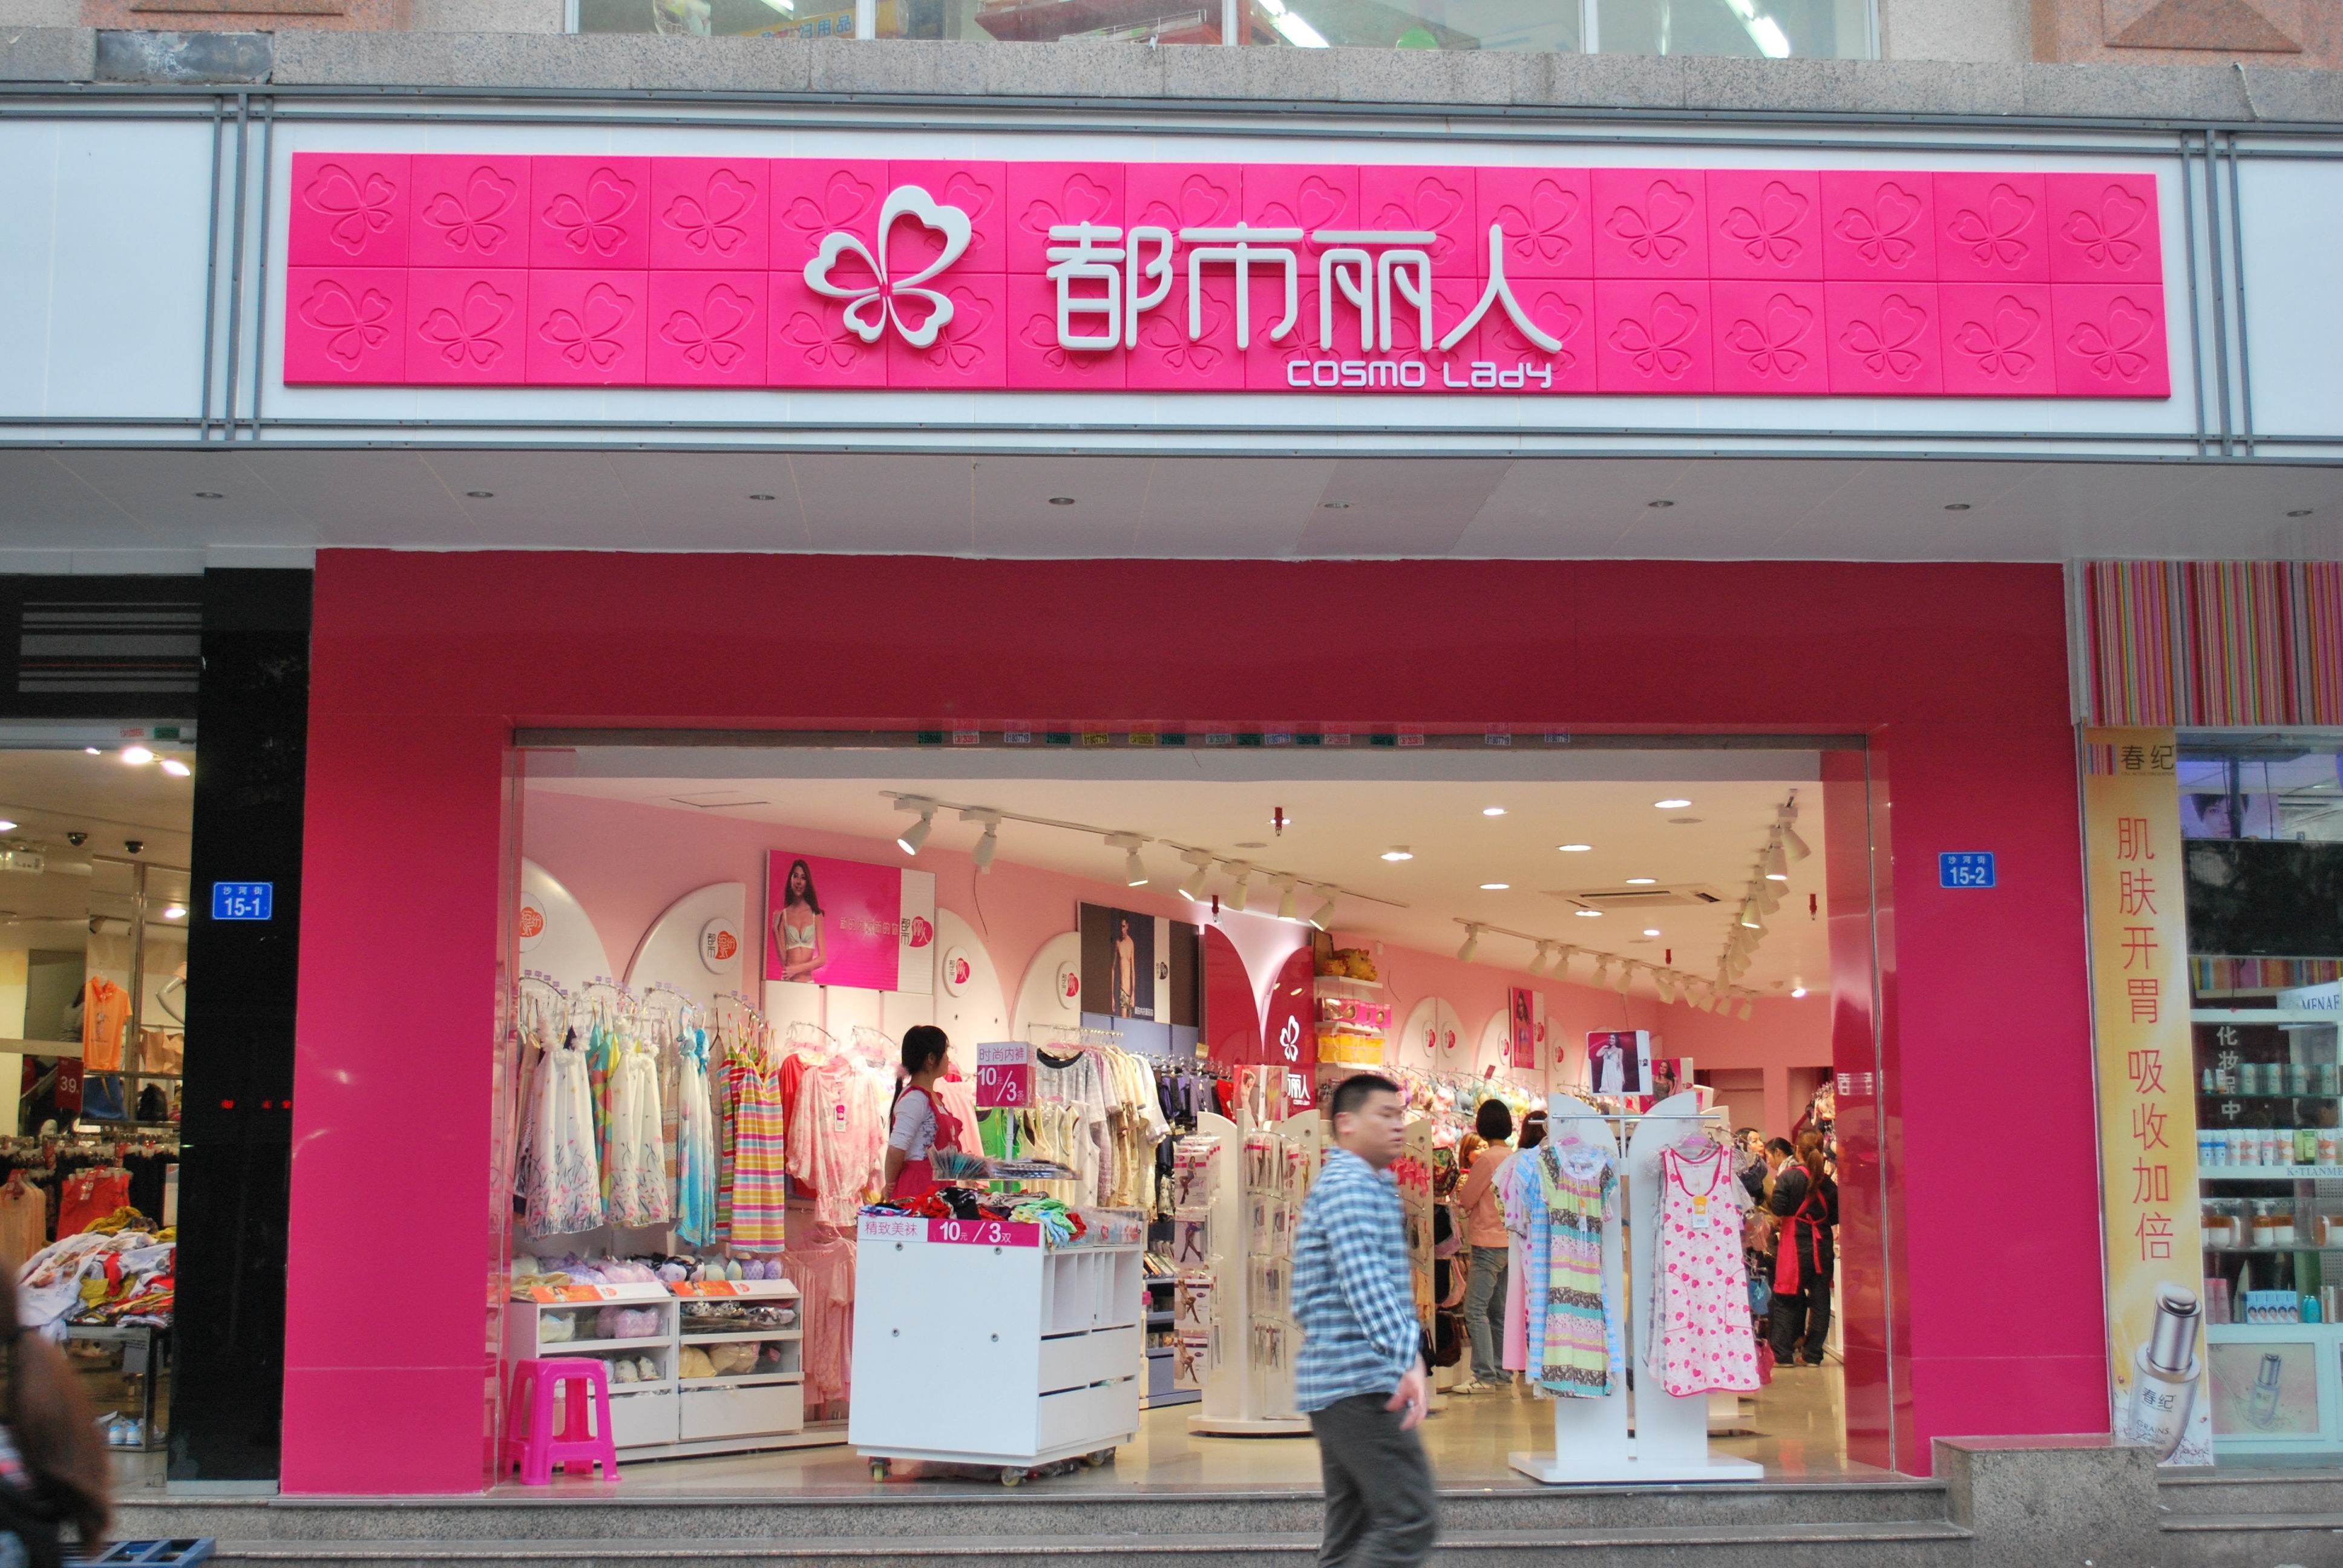 Cosmo Lady is China’s top lingerie brand by market share. Photo: Handout